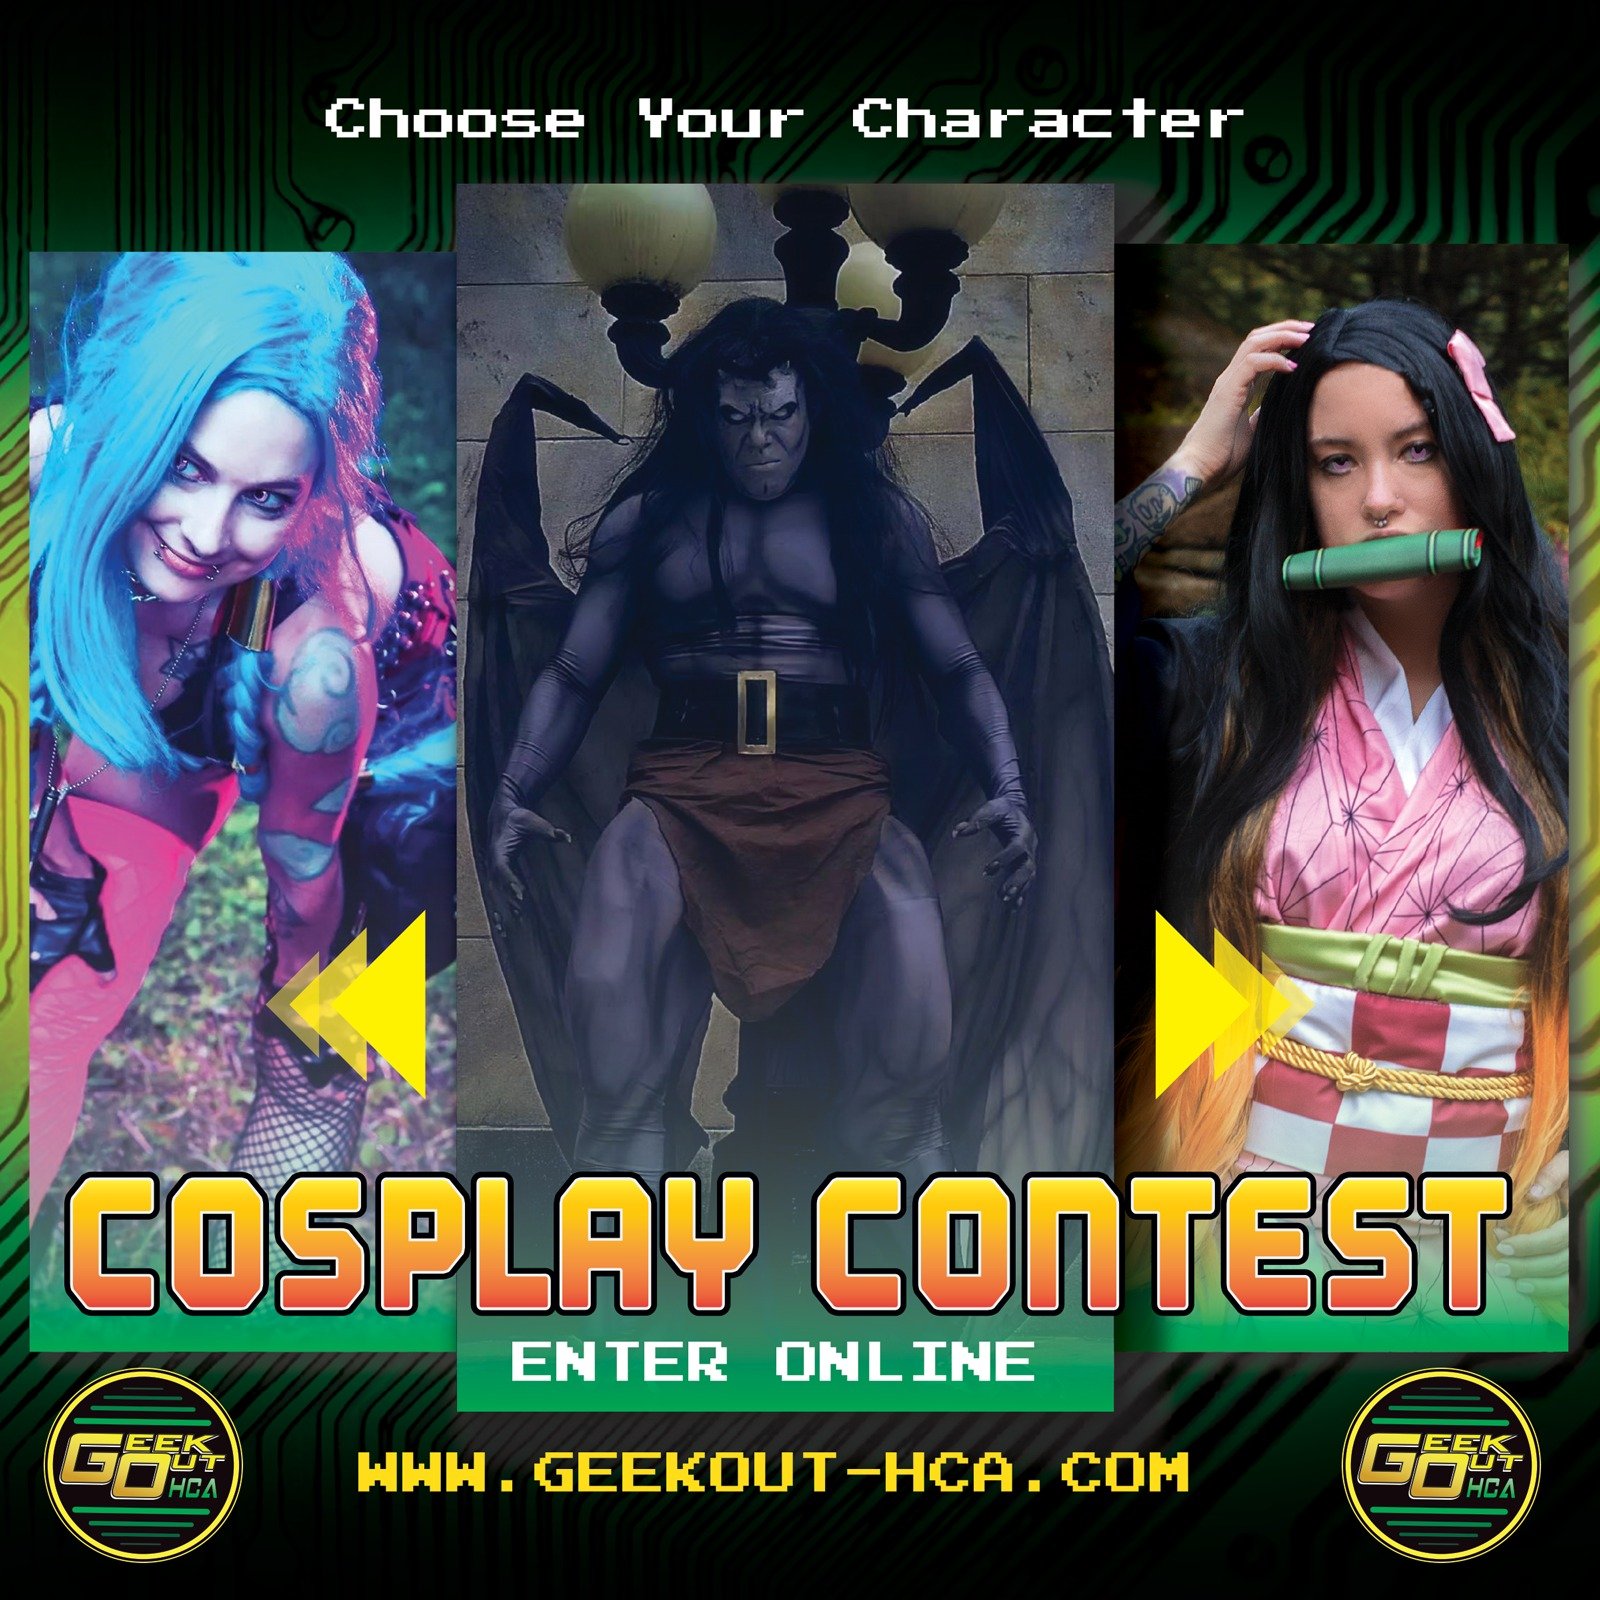   COSPLAY CONTEST ANNOUNCEMENT   We're so excited for our 9th annual cosplay contest! Get your Geek on with your best cosplays to enter for a chance to win! The contest will take place Saturday June 8th of the event and directly following the contest